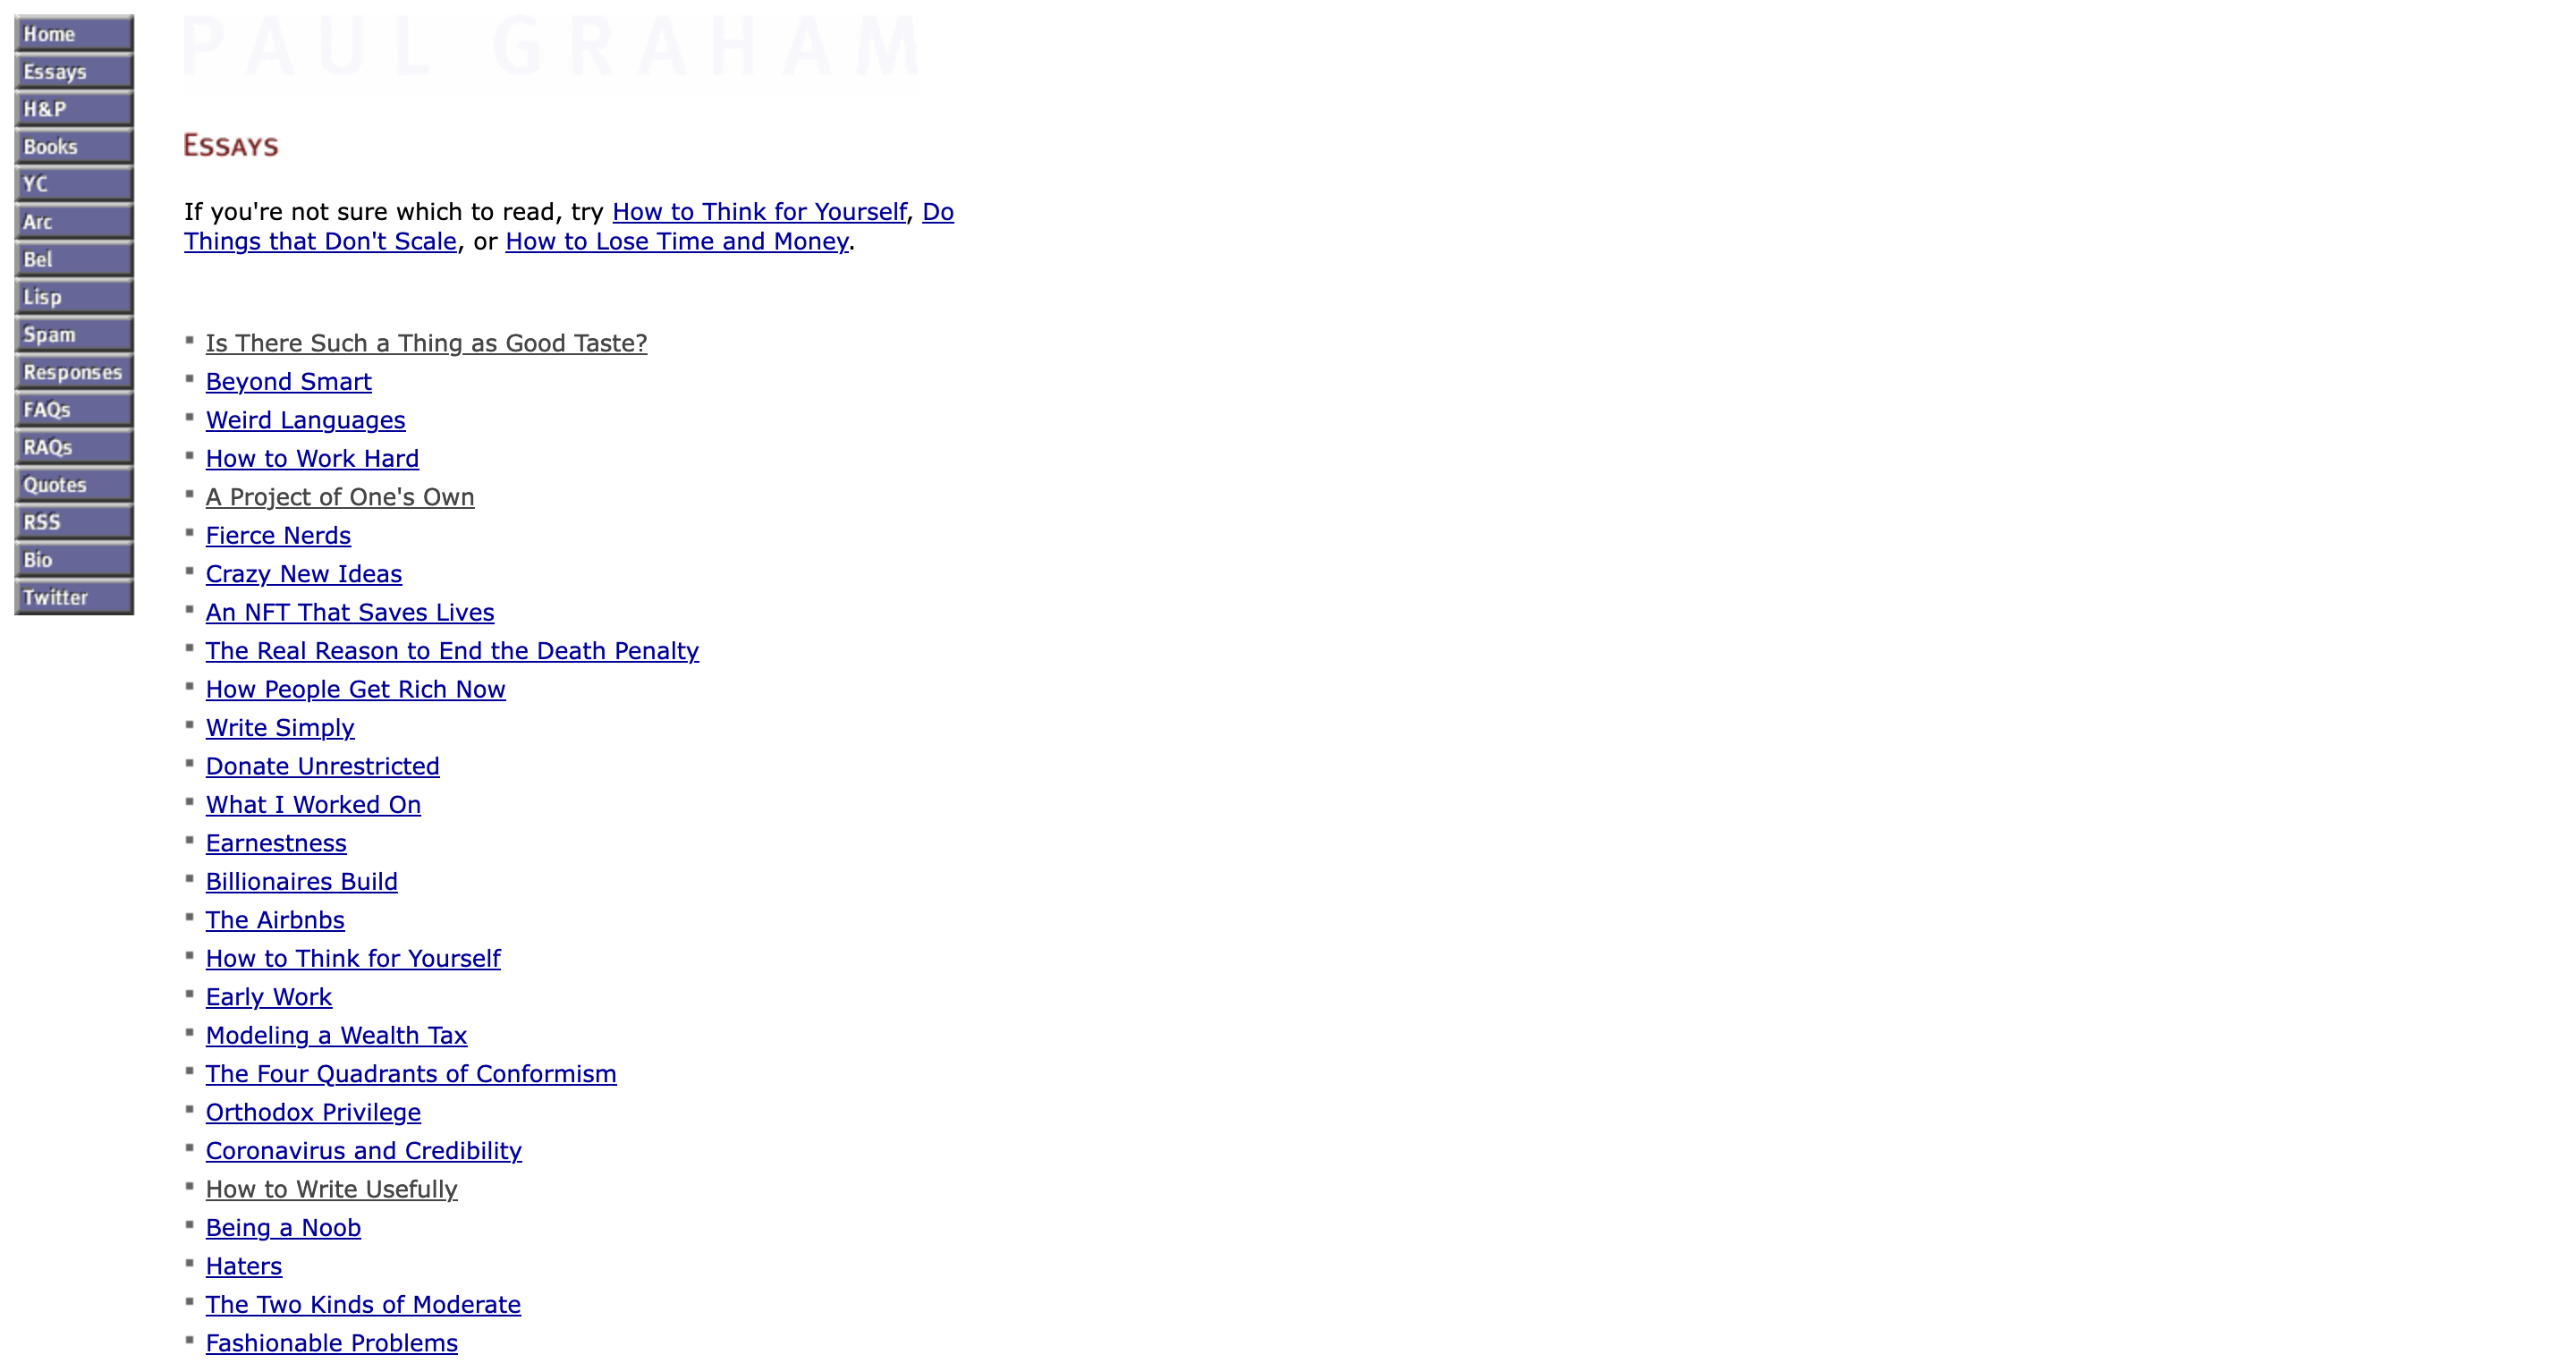 Paul Graham's personal website, featuring a collection of essays